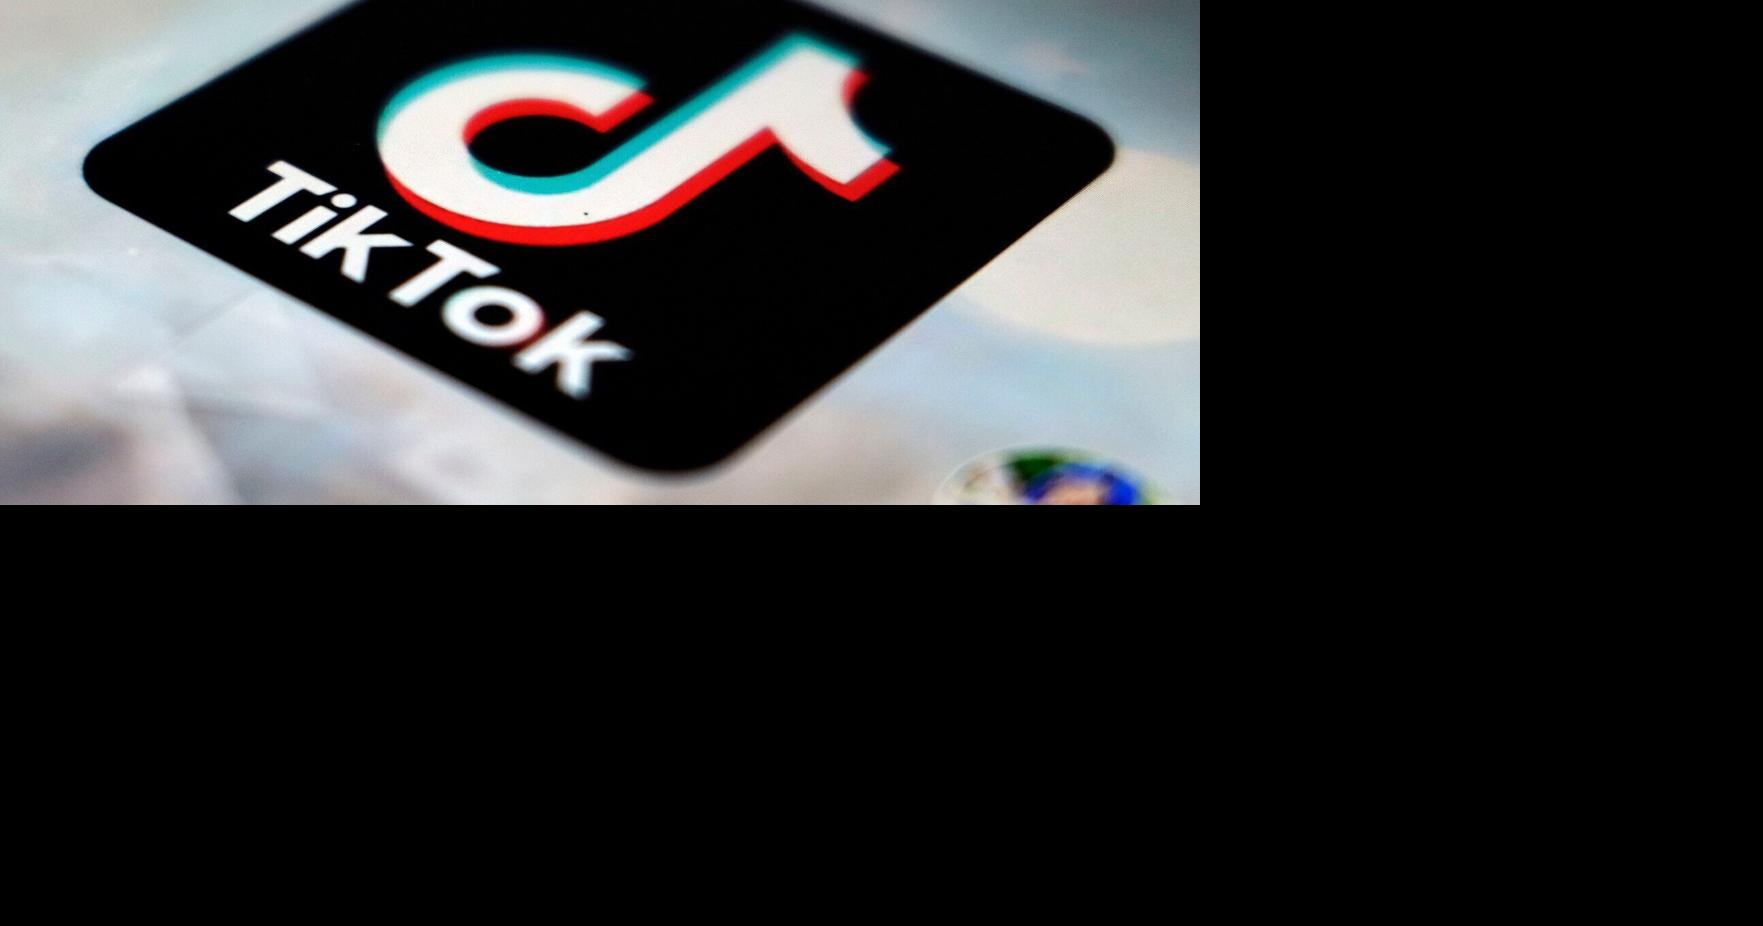 Bill to block Montanans from accessing TikTok clears Senate committee